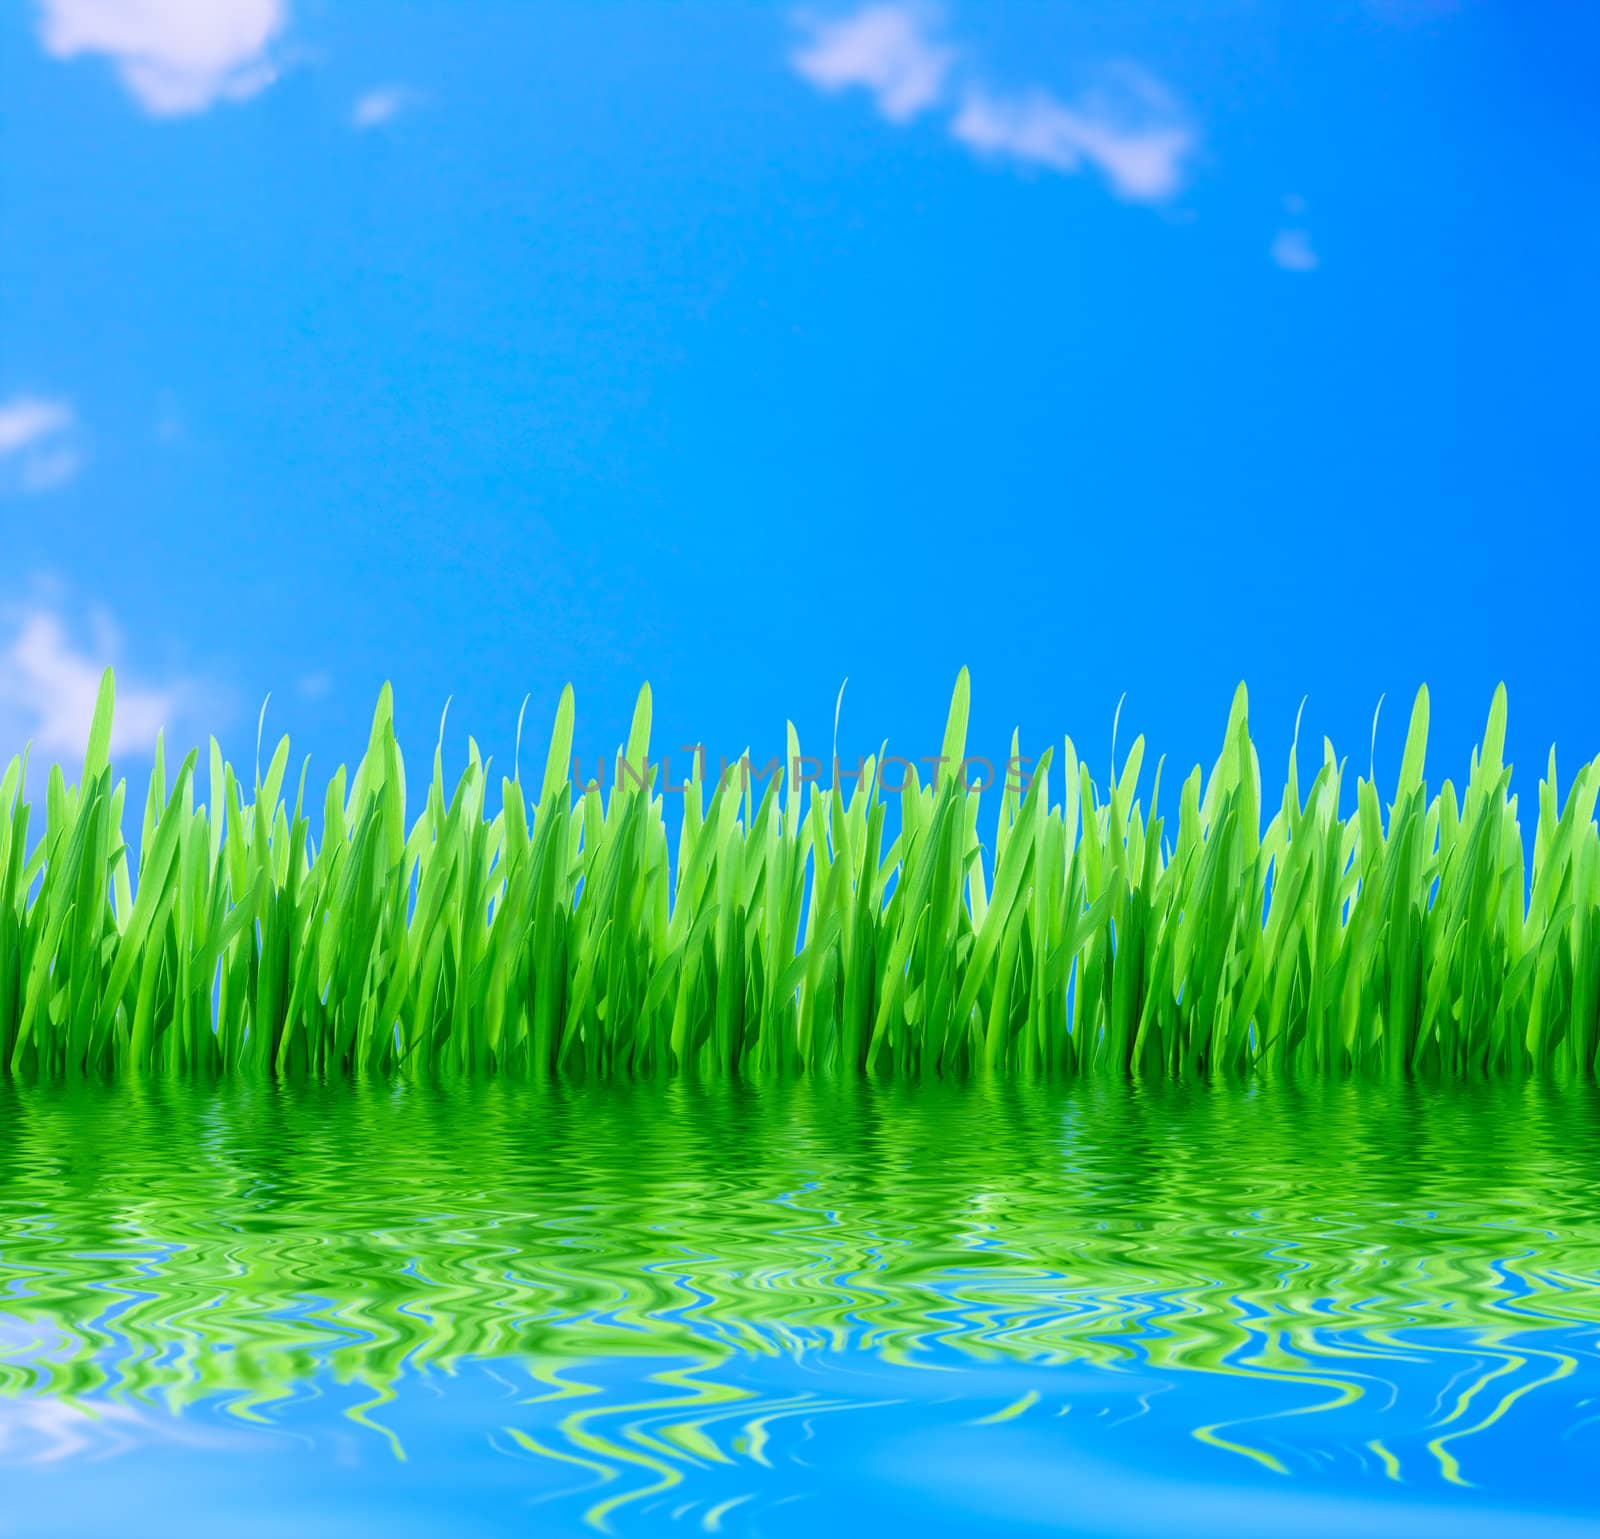 Green grass wth blue sky by rbv